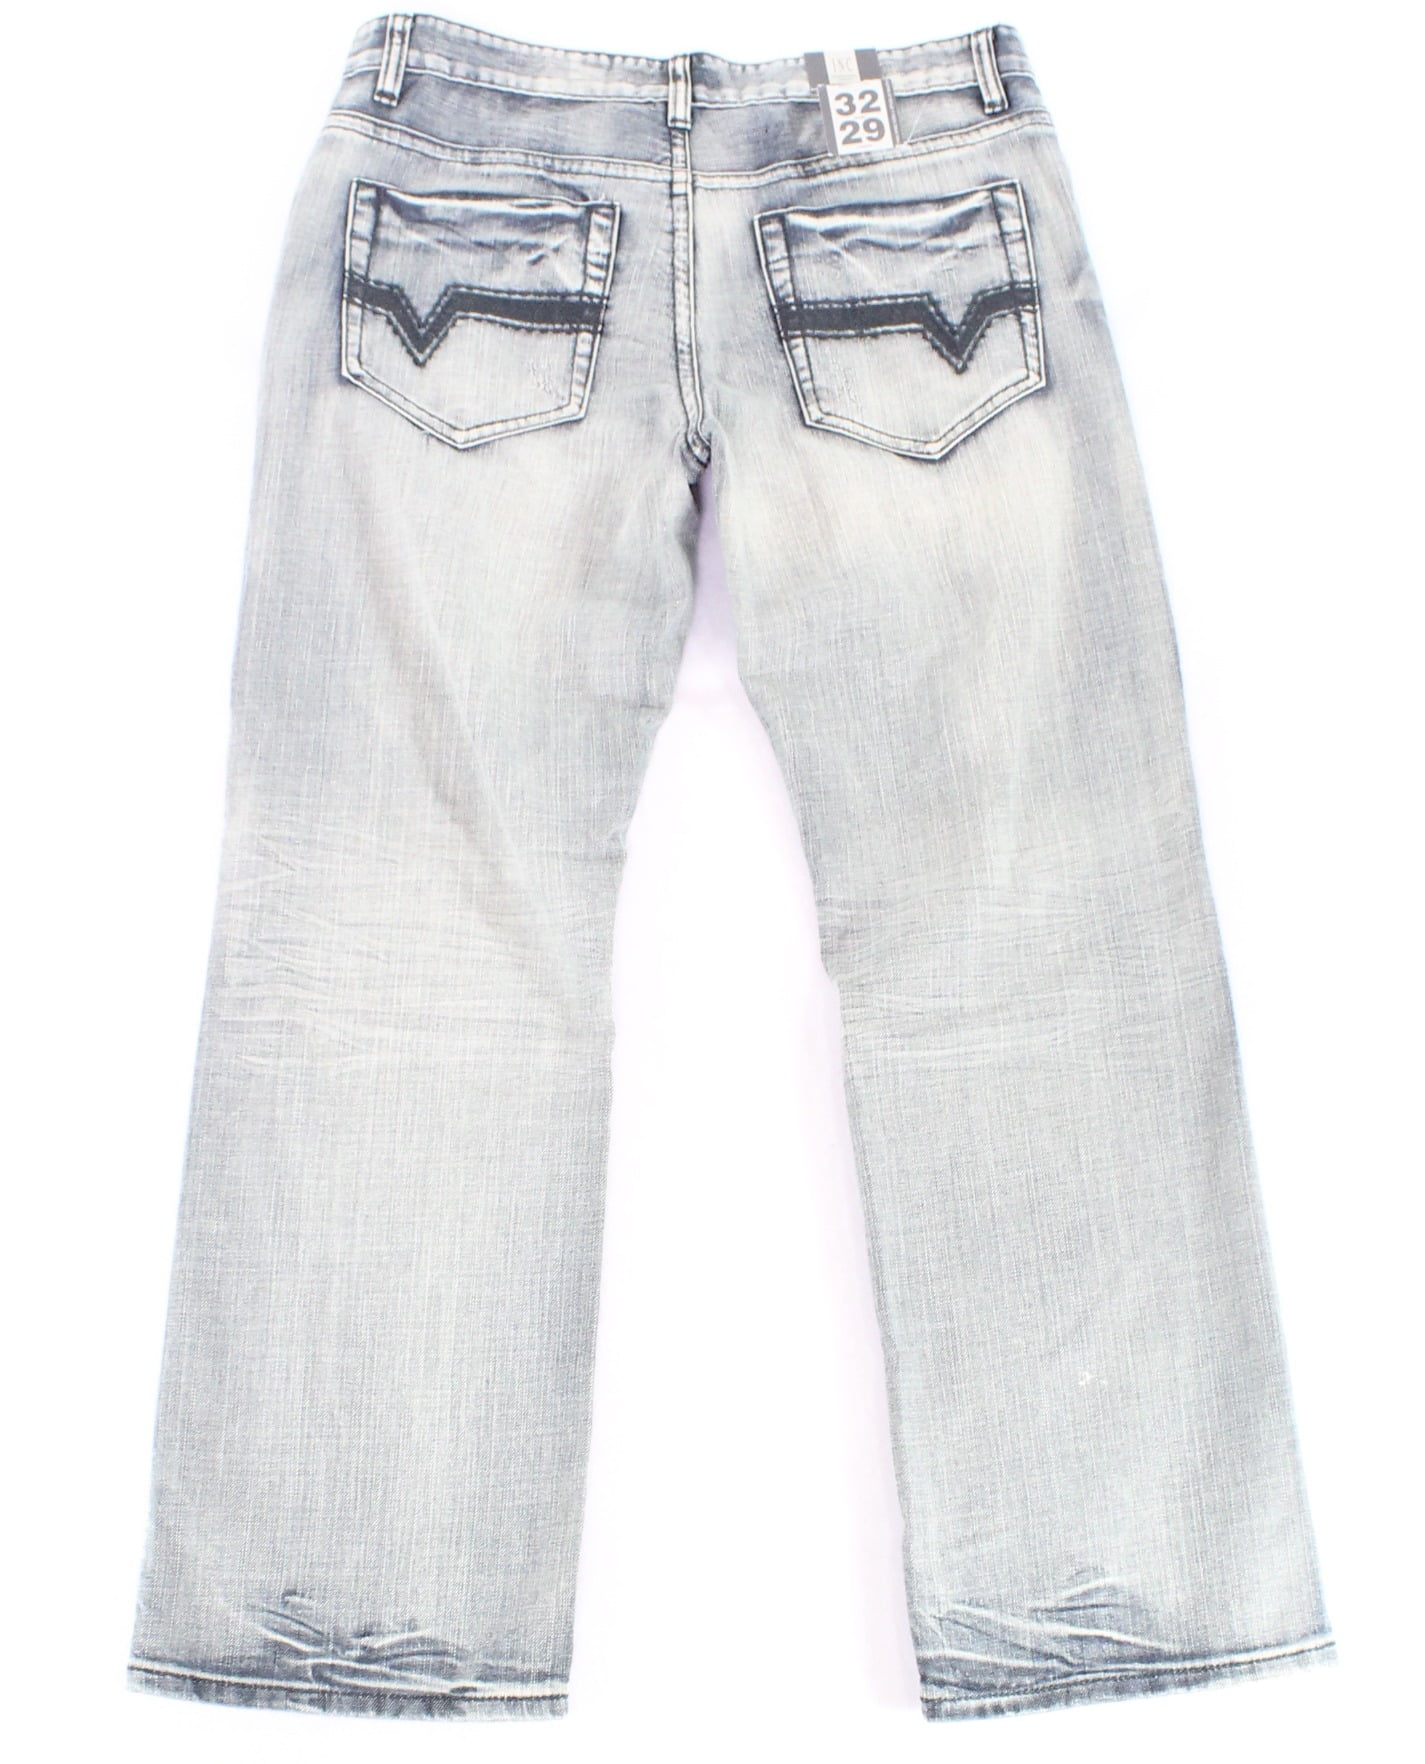 inc barcelona relaxed fit jeans